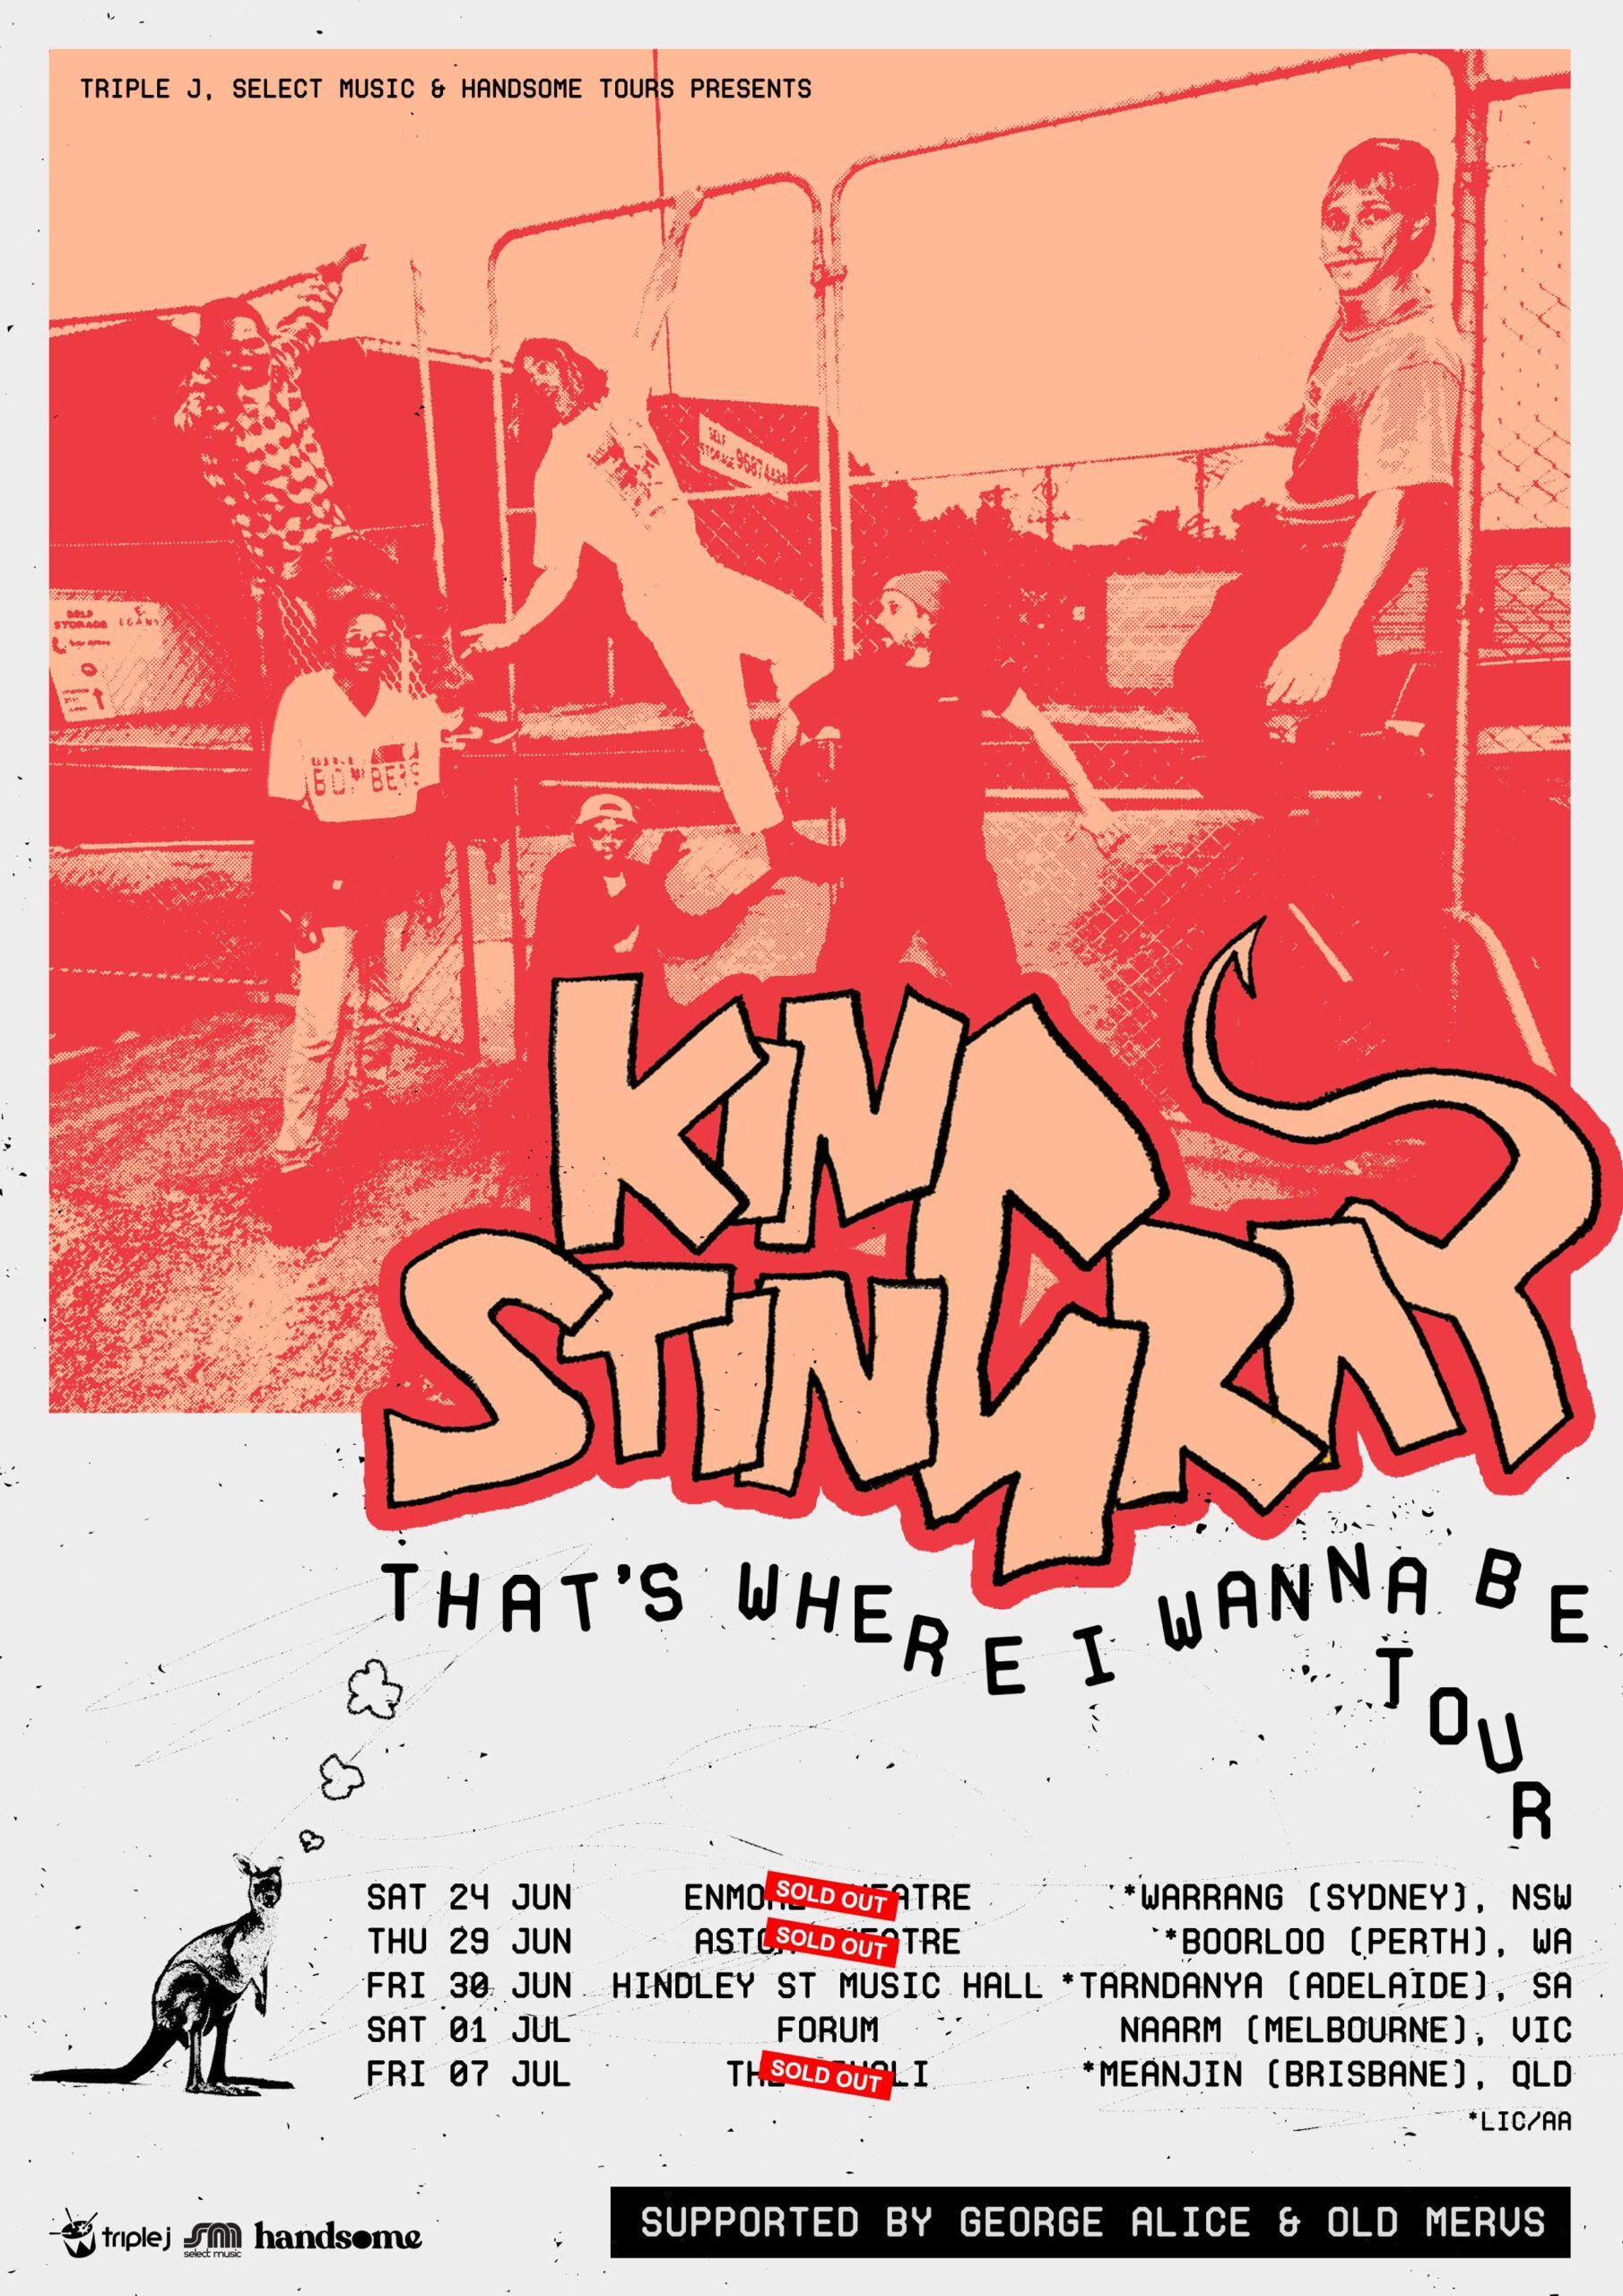 https://www.handsometours.com/wp-content/uploads/2023/03/KING-STINGRAY_A4-POSTER-SOLD-OUT-SYD-scaled.jpg